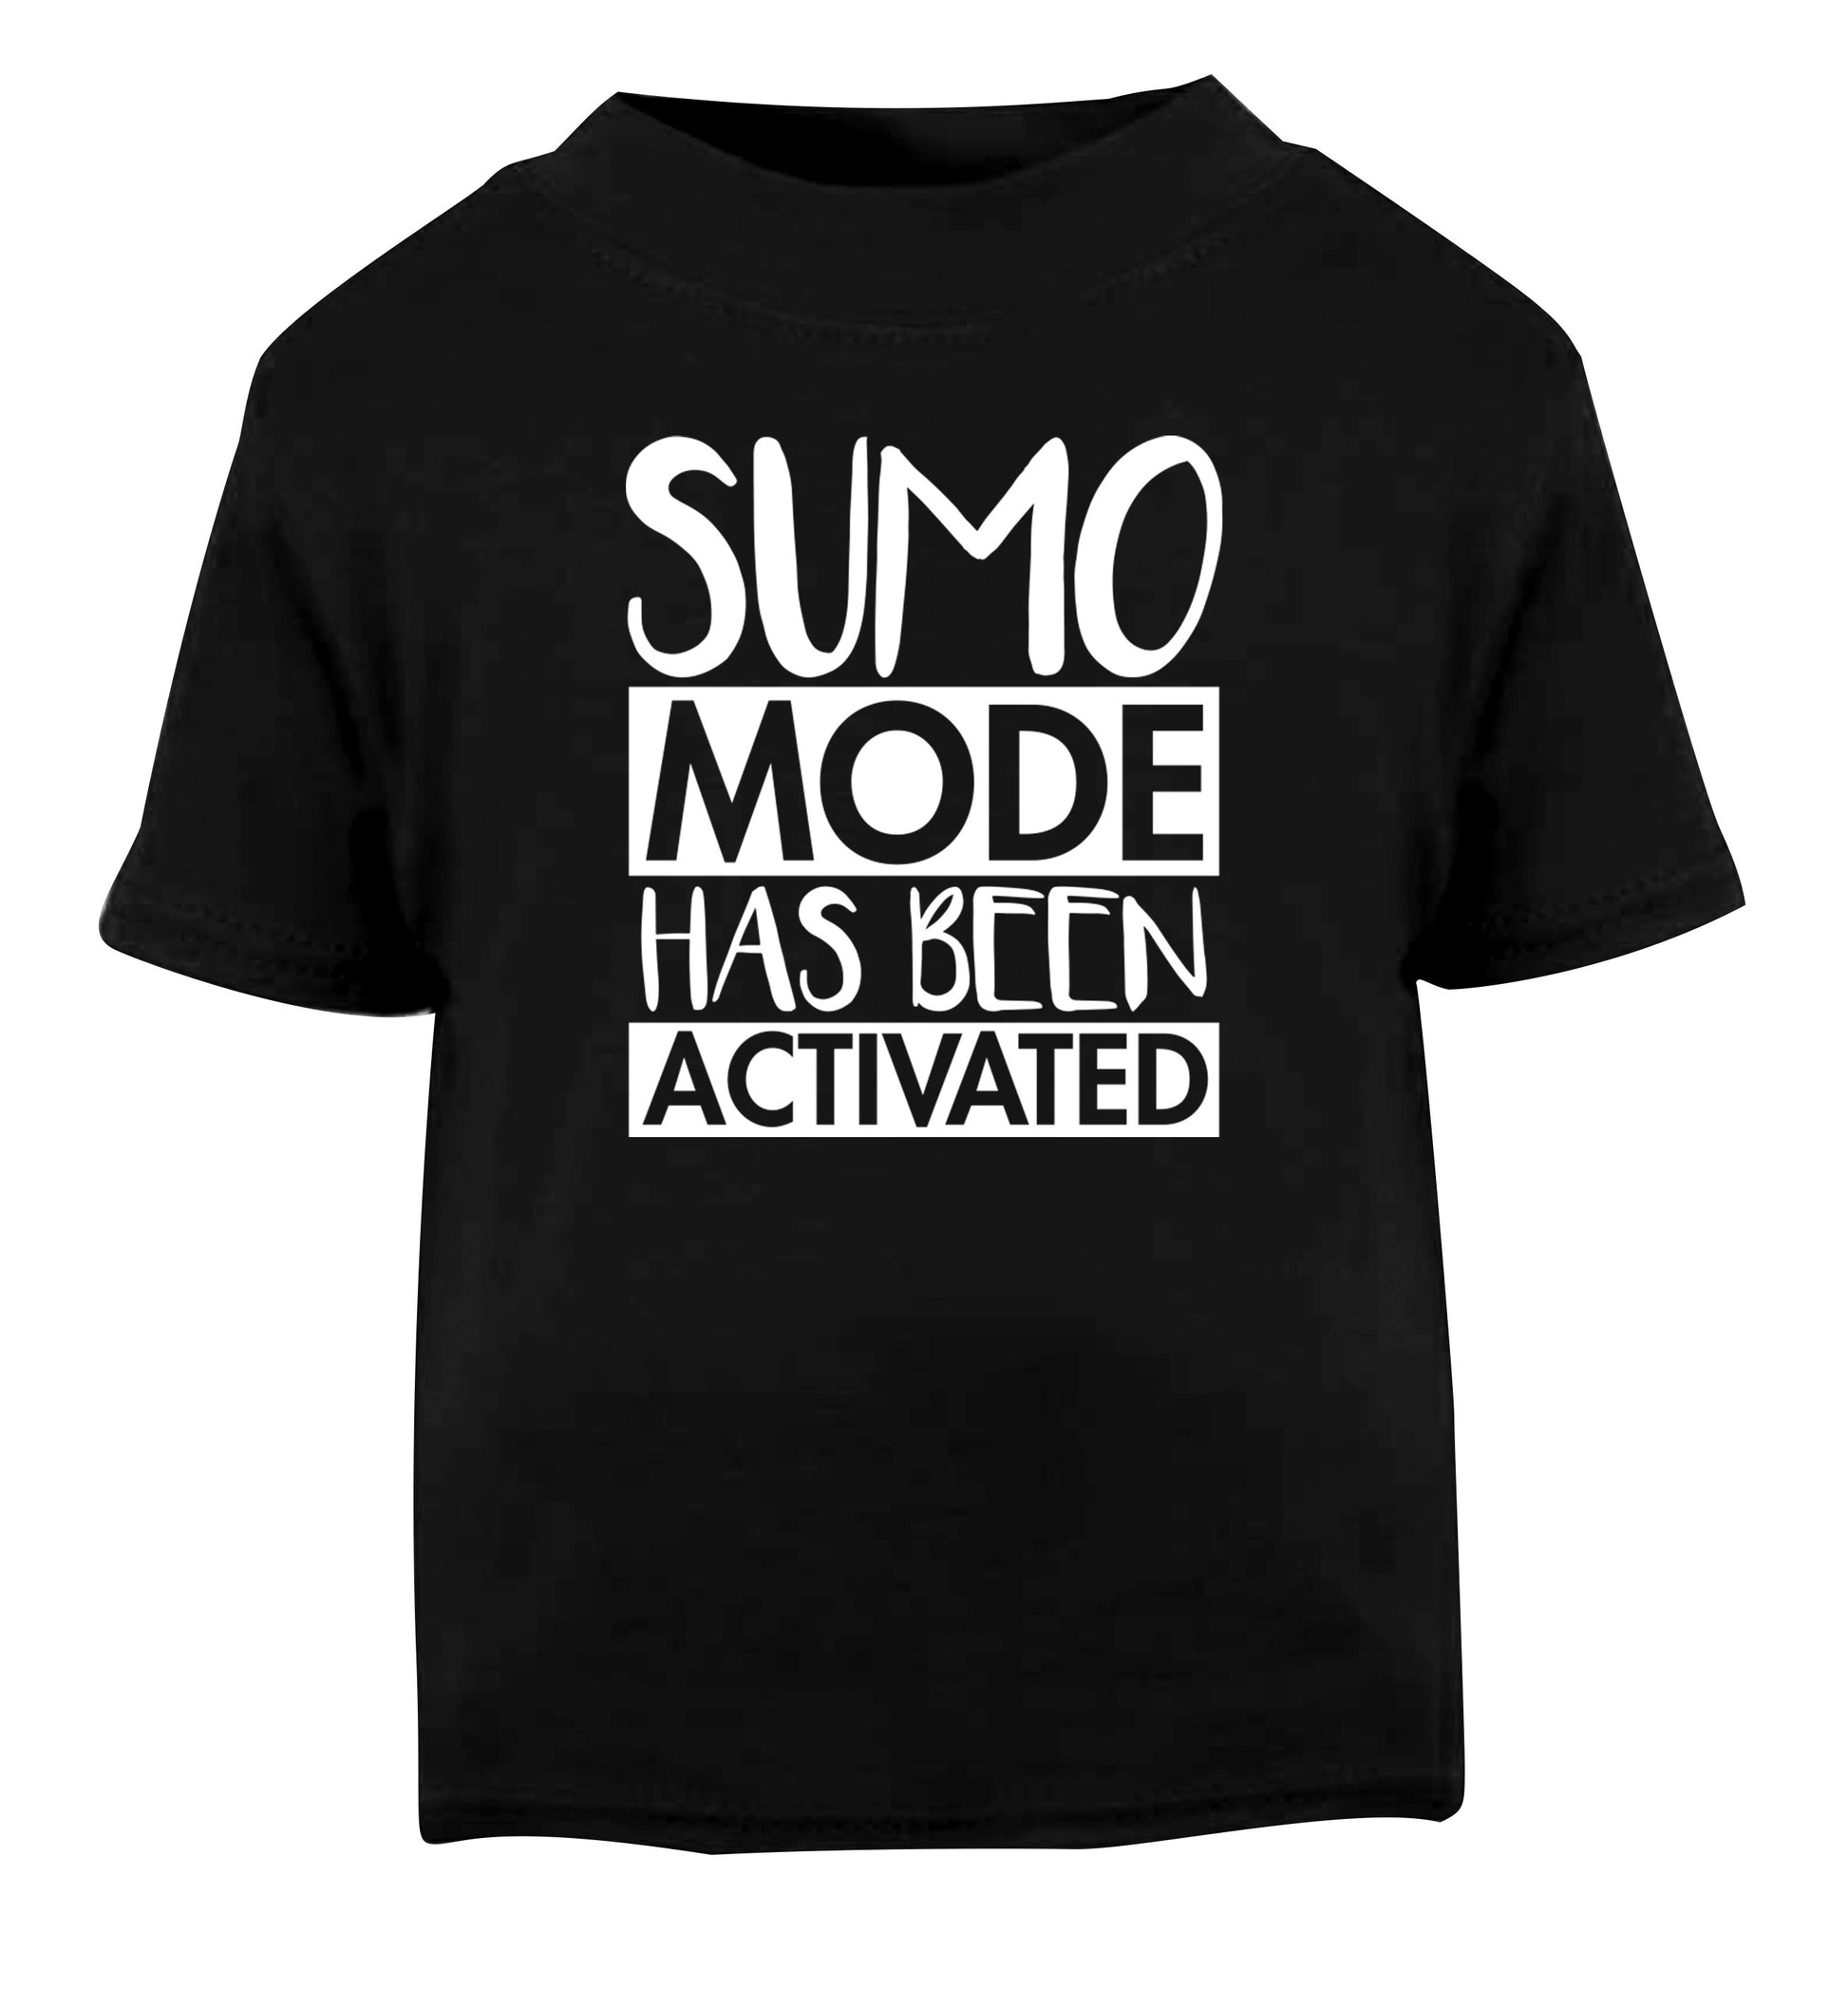 Sumo mode activated Black Baby Toddler Tshirt 2 years